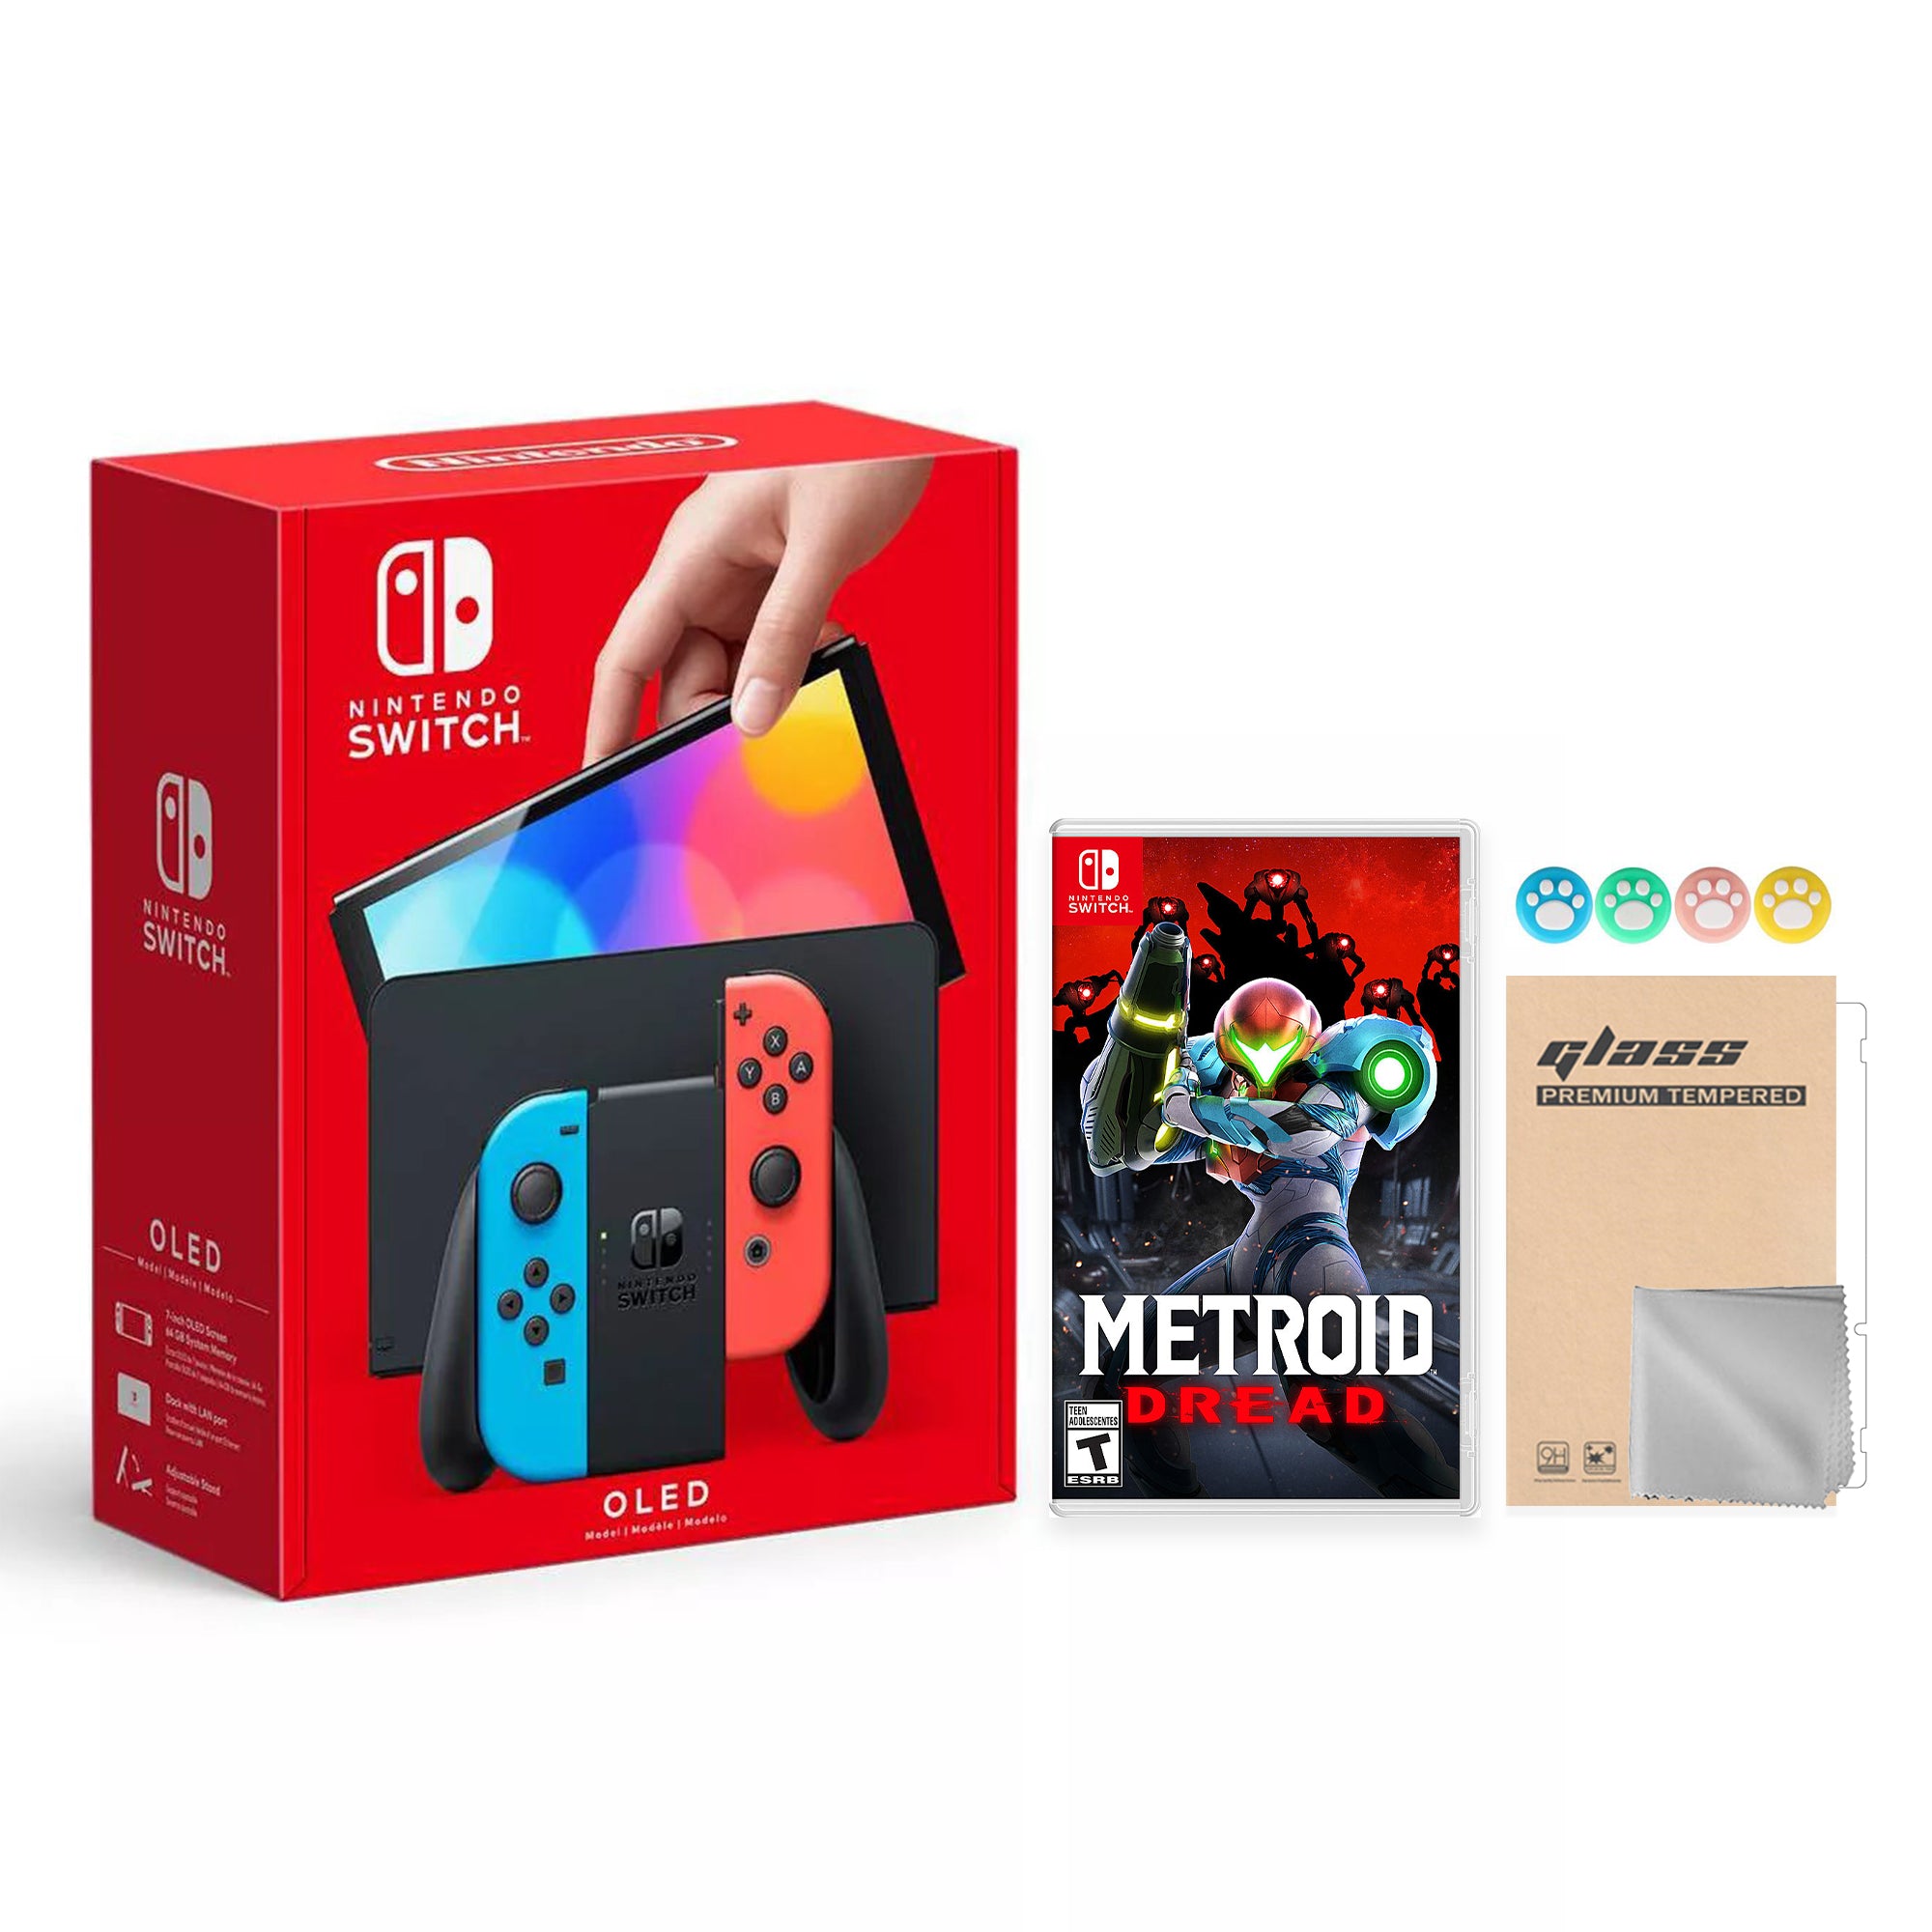 2022 New Nintendo Switch OLED Model Neon Red Blue Joy Con 64GB Console Improved HD Screen & LAN-Port Dock with Metroid Dread, Mytrix Joystick Caps & Screen Protector